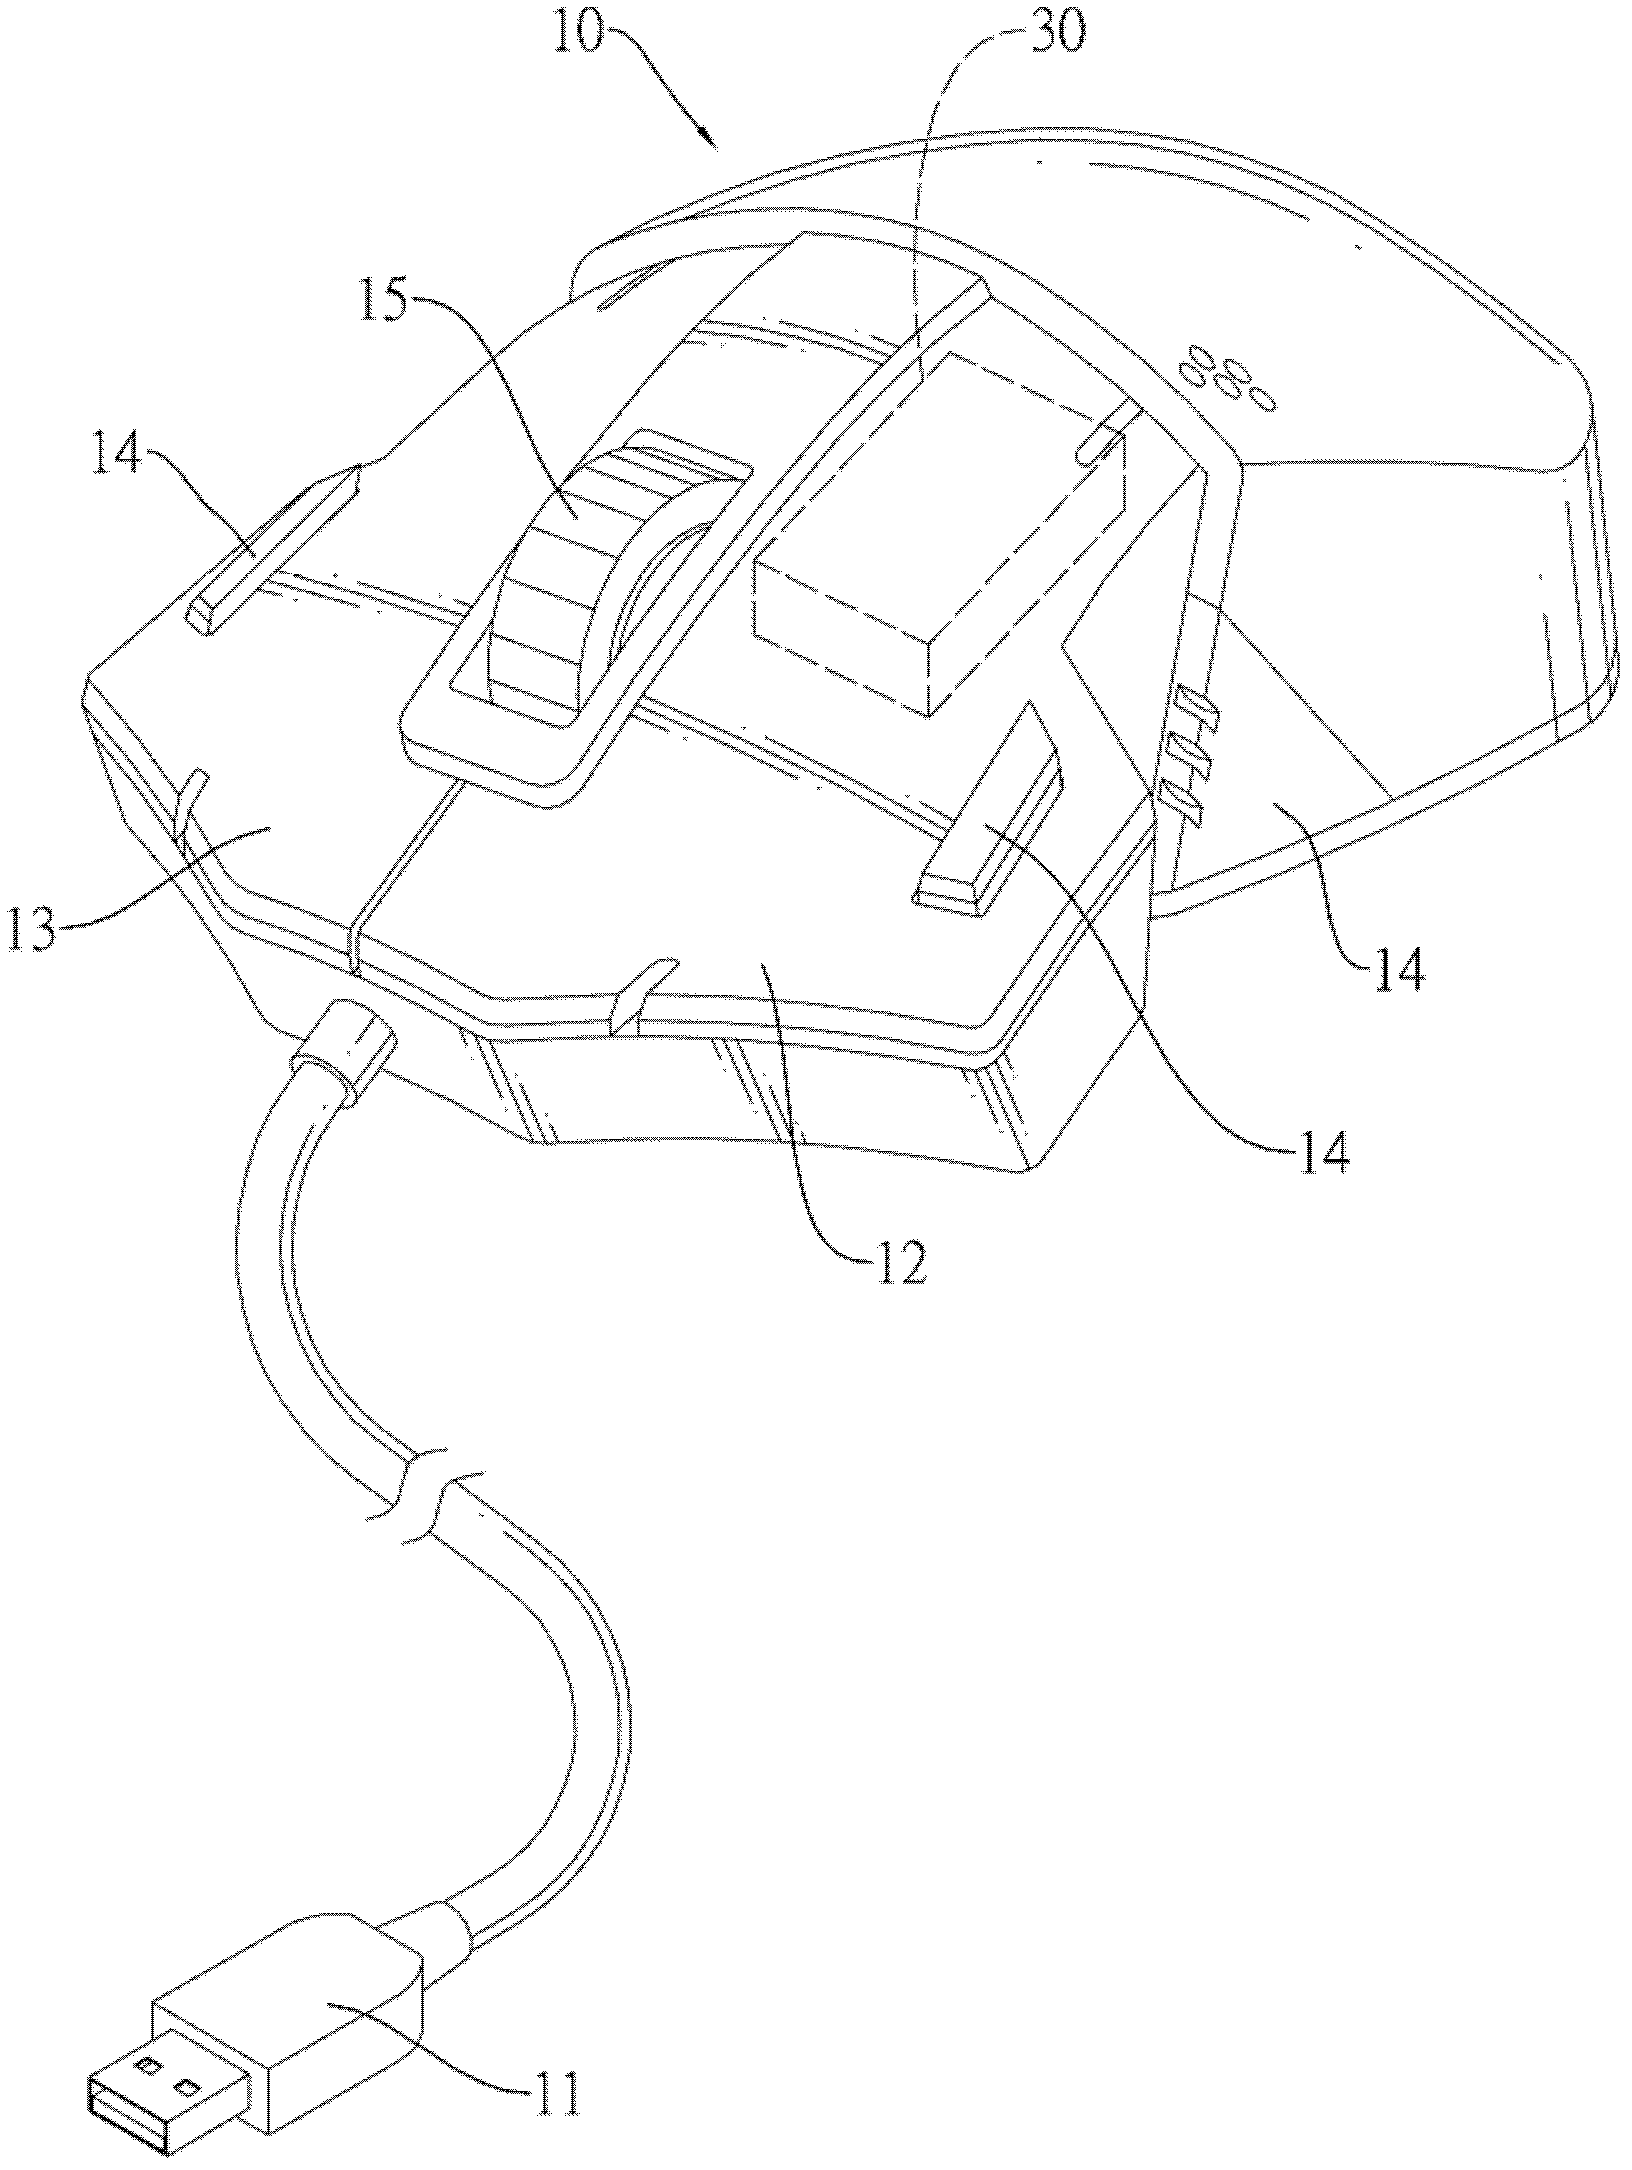 Multi-button mouse with multiple operating modes